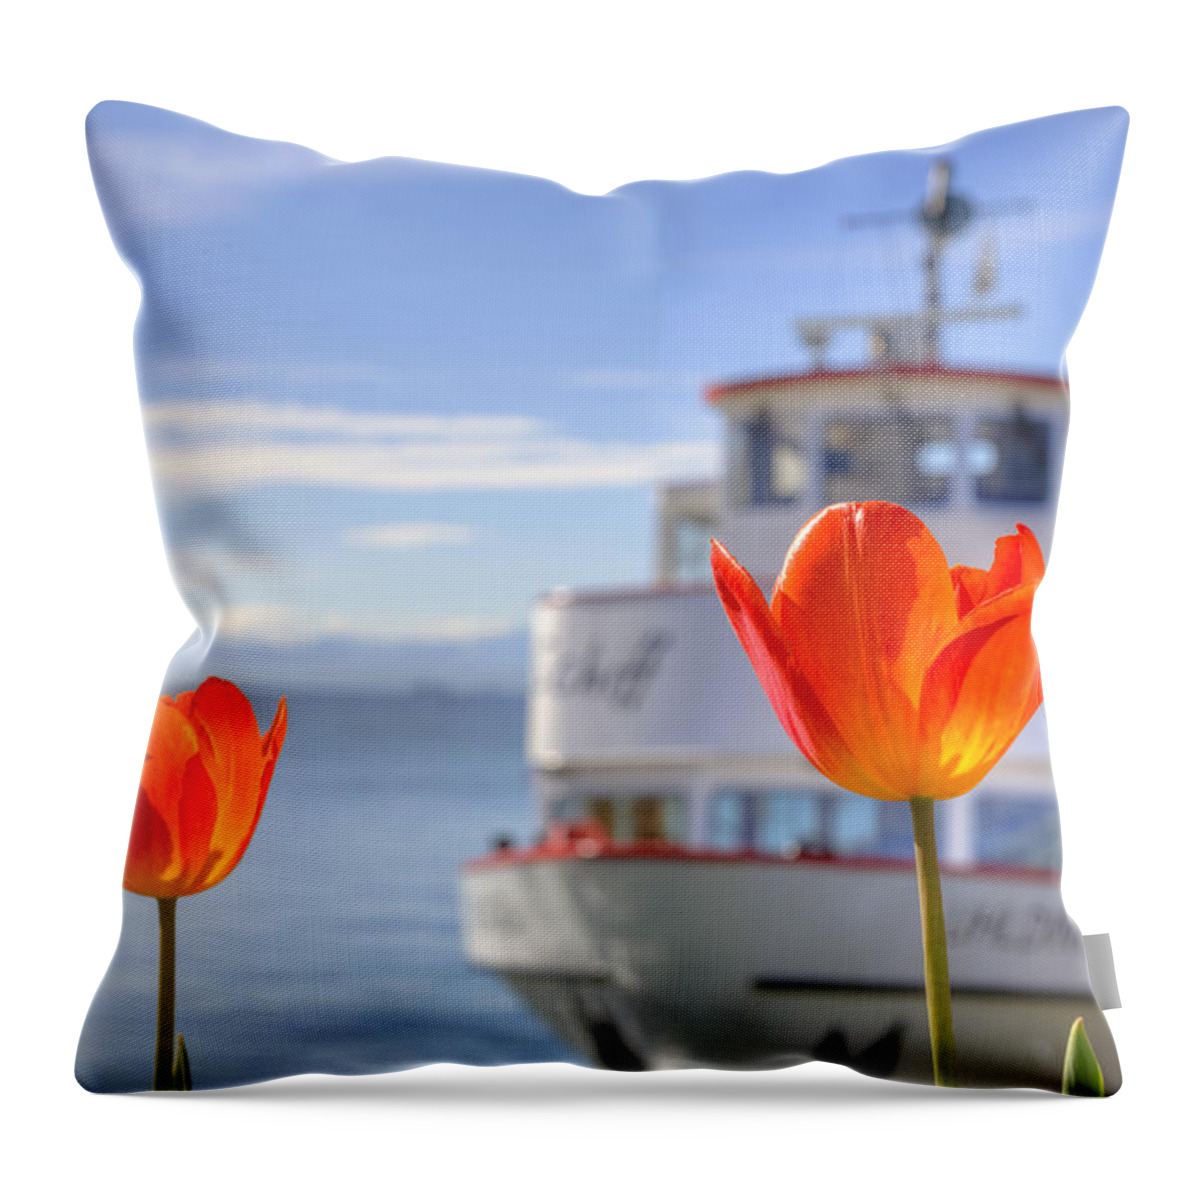 Uhldingen Throw Pillow featuring the photograph Lake Constance by Joana Kruse